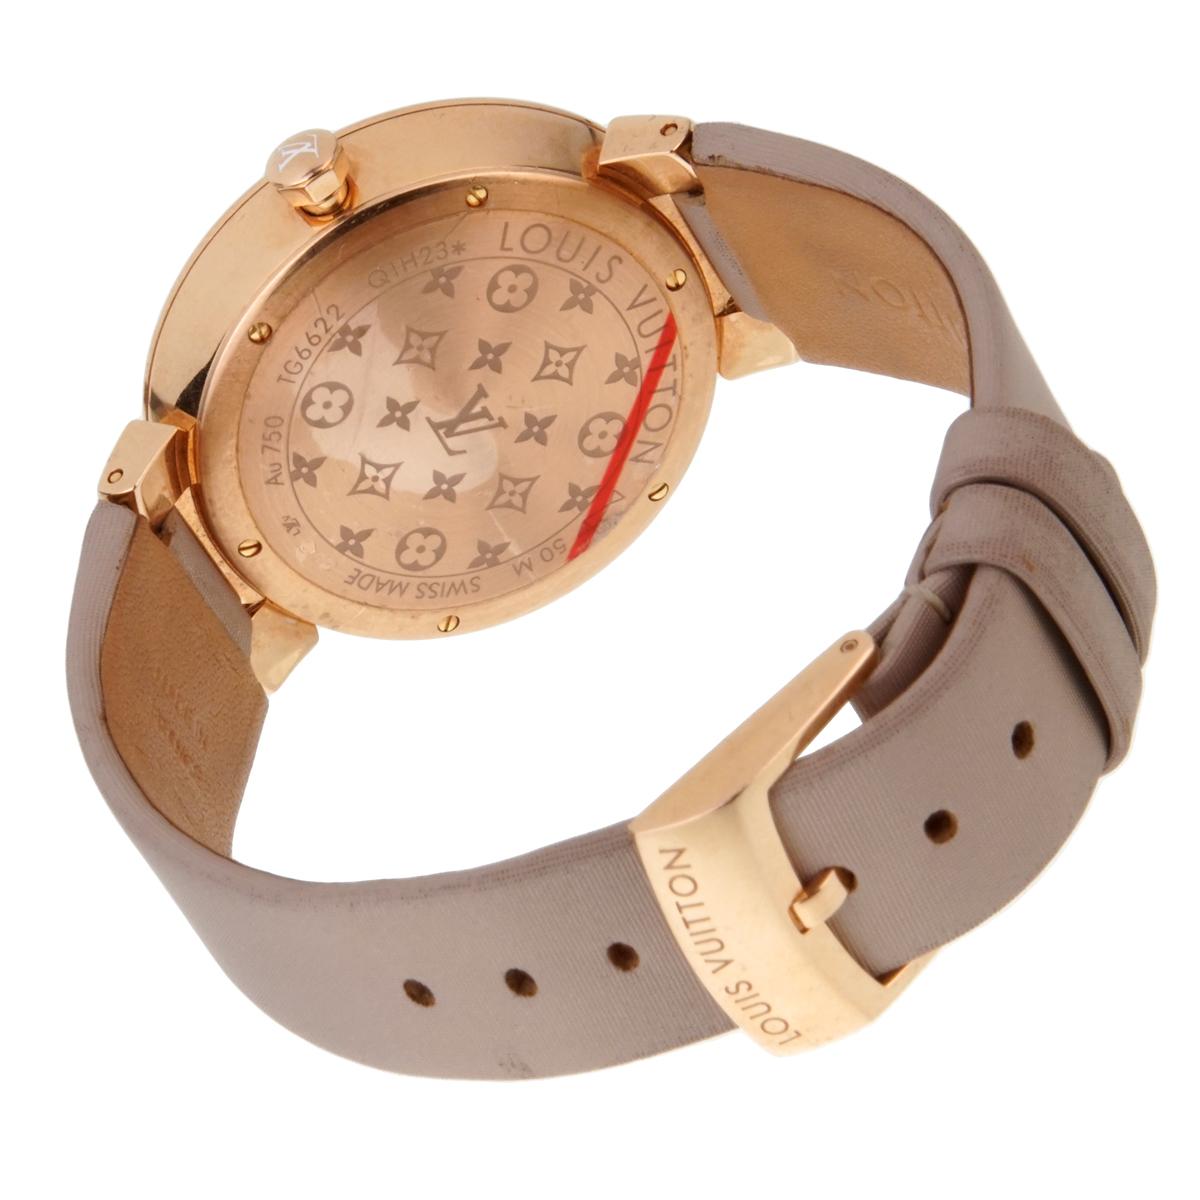 A classic Louis Vuitton Tambour Slim rose gold case set with 60 diamonds, the sculpted mother of pearl monogram flower is set with an additional 58 round brilliant cut diamonds. The bracelet is interchangeable and features the Ardillon buckle in 18k